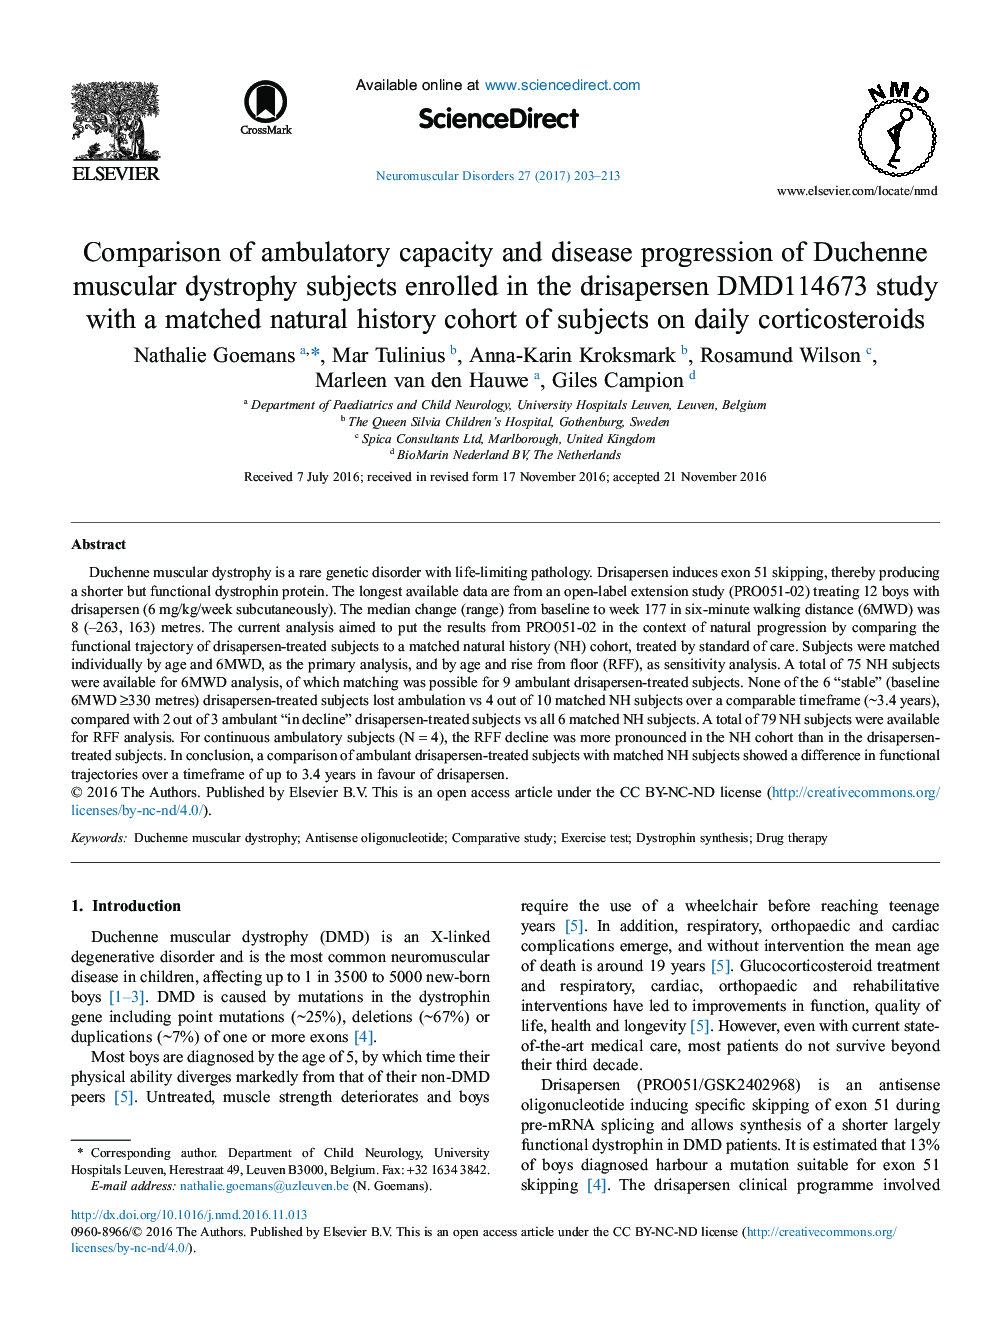 Comparison of ambulatory capacity and disease progression of Duchenne muscular dystrophy subjects enrolled in the drisapersen DMD114673 study with a matched natural history cohort of subjects on daily corticosteroids